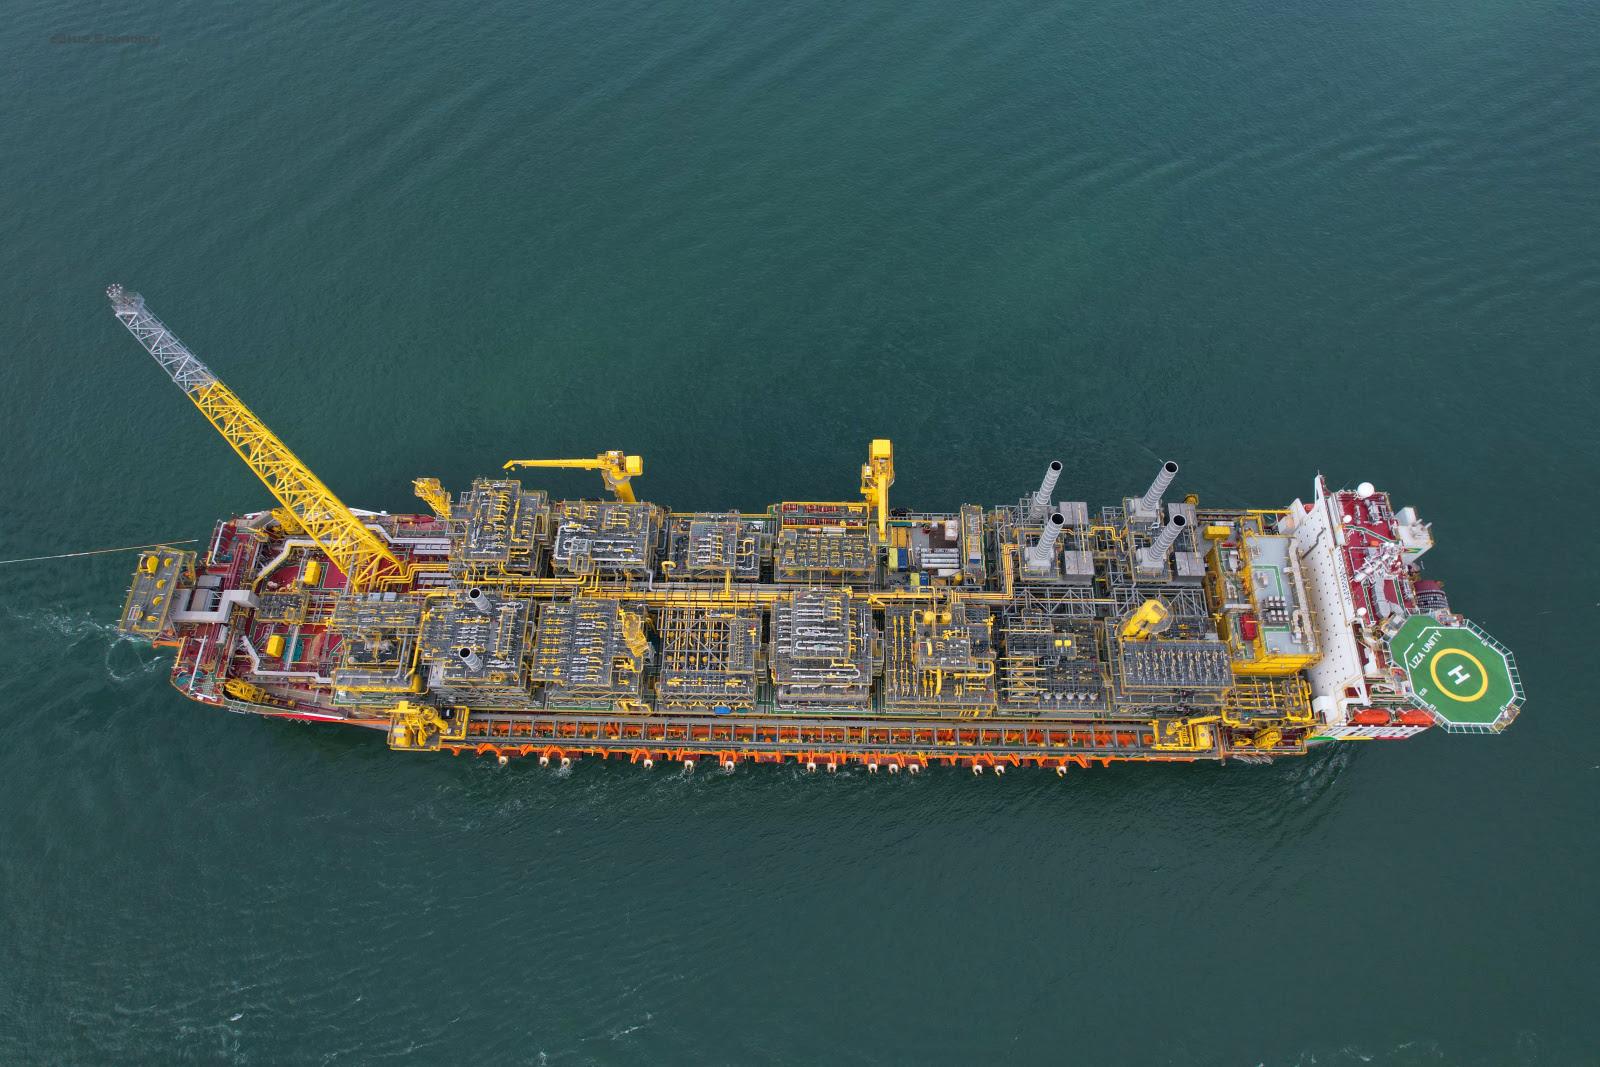 eBlue_economy_ABS Awards World’s First SUSTAIN Notation to SBM Offshore’s Liza Unity FPSO